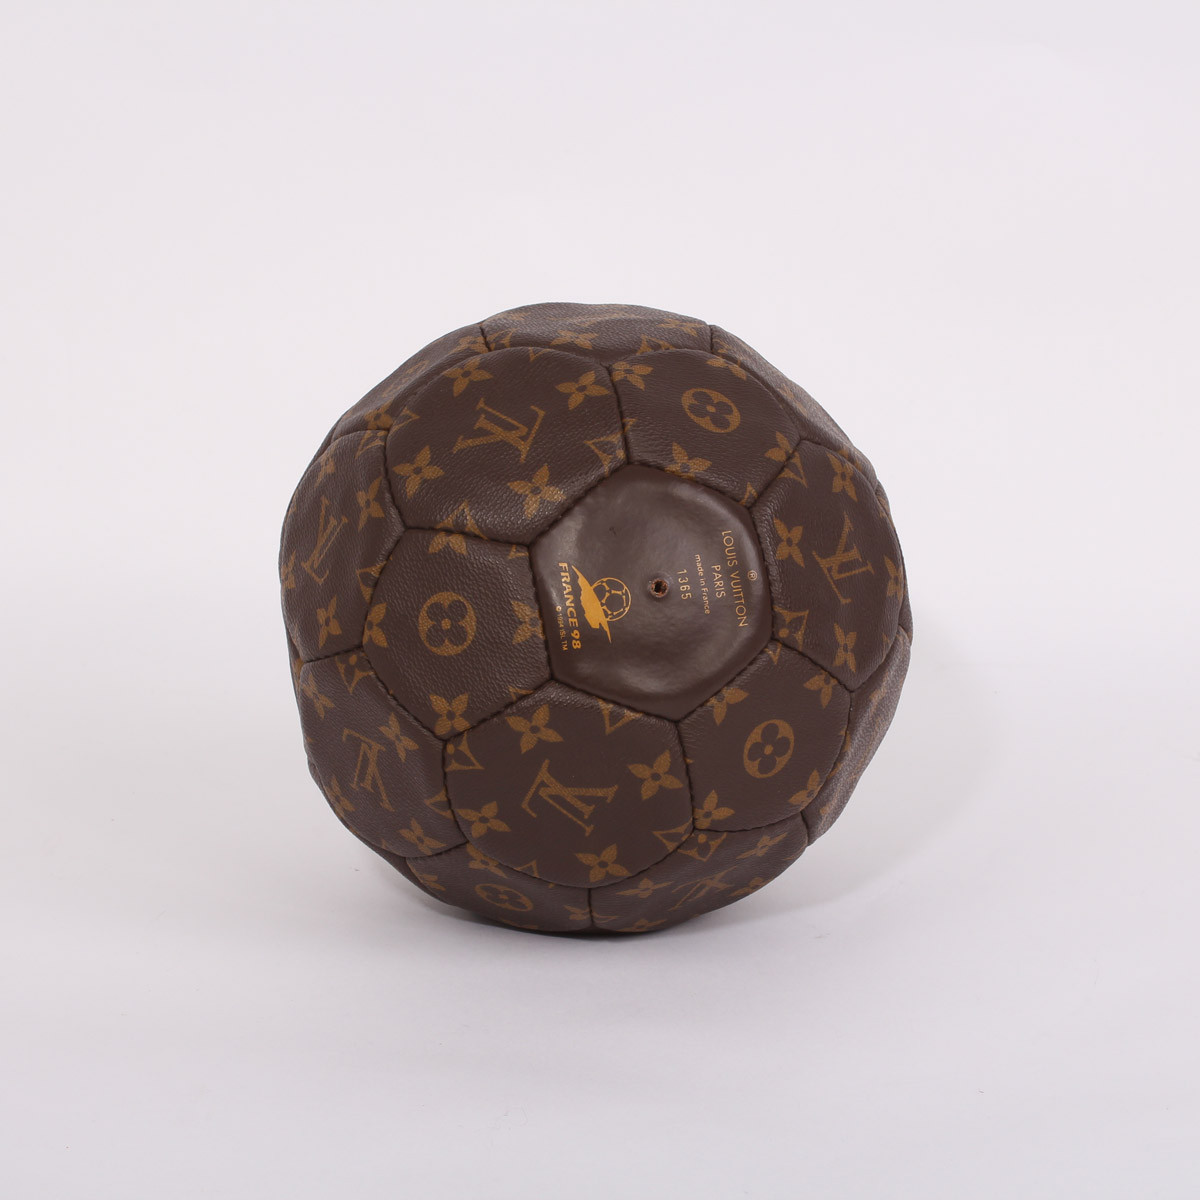 A Louis Vuitton Limited Edition 1998 World Cup Football, The Art of Travel, 2019